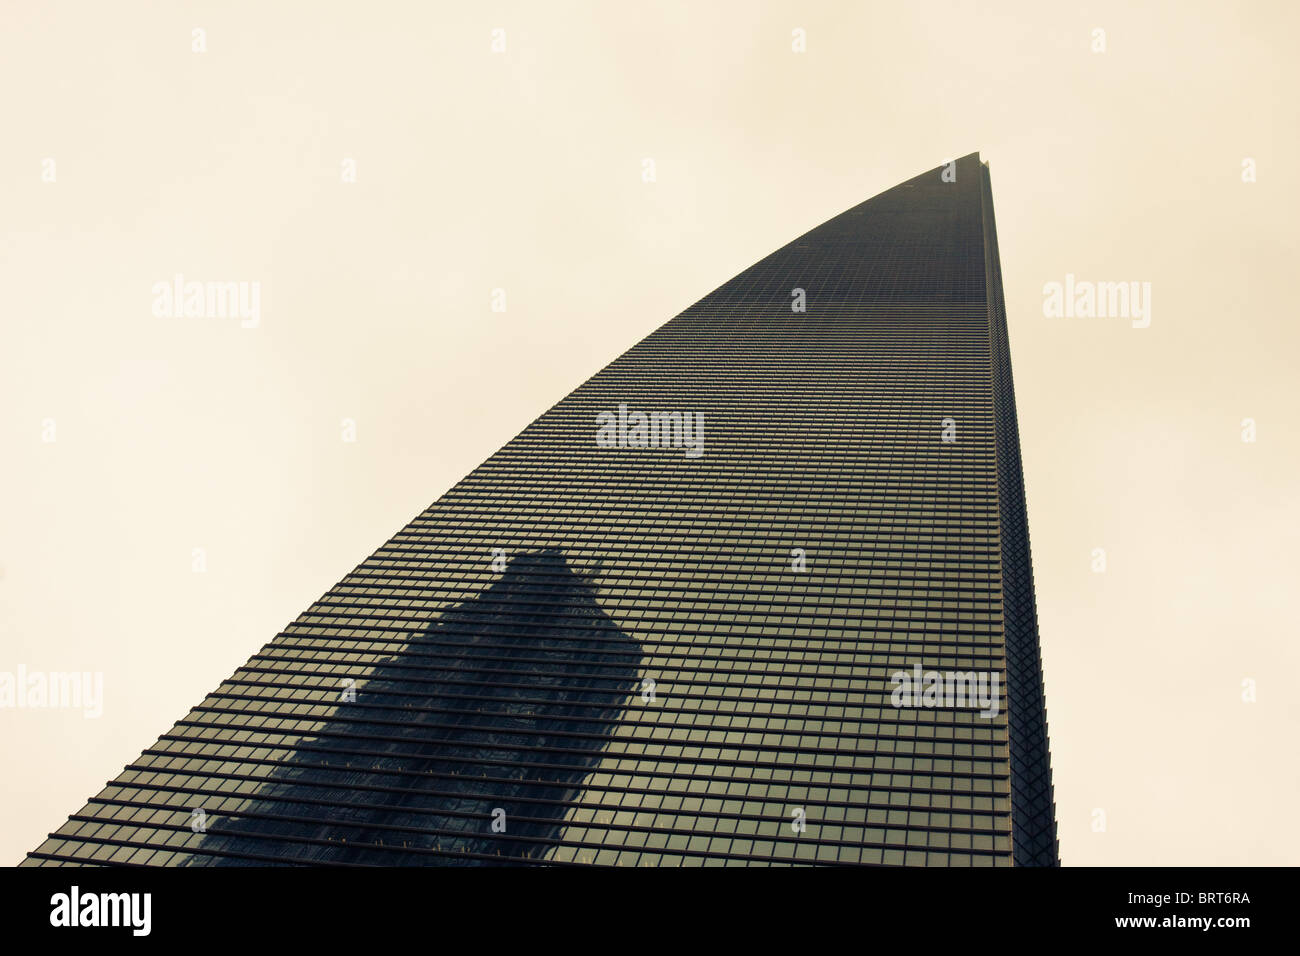 Looking up at the shanghai world financial centre in Pudong, Shanghai China Stock Photo